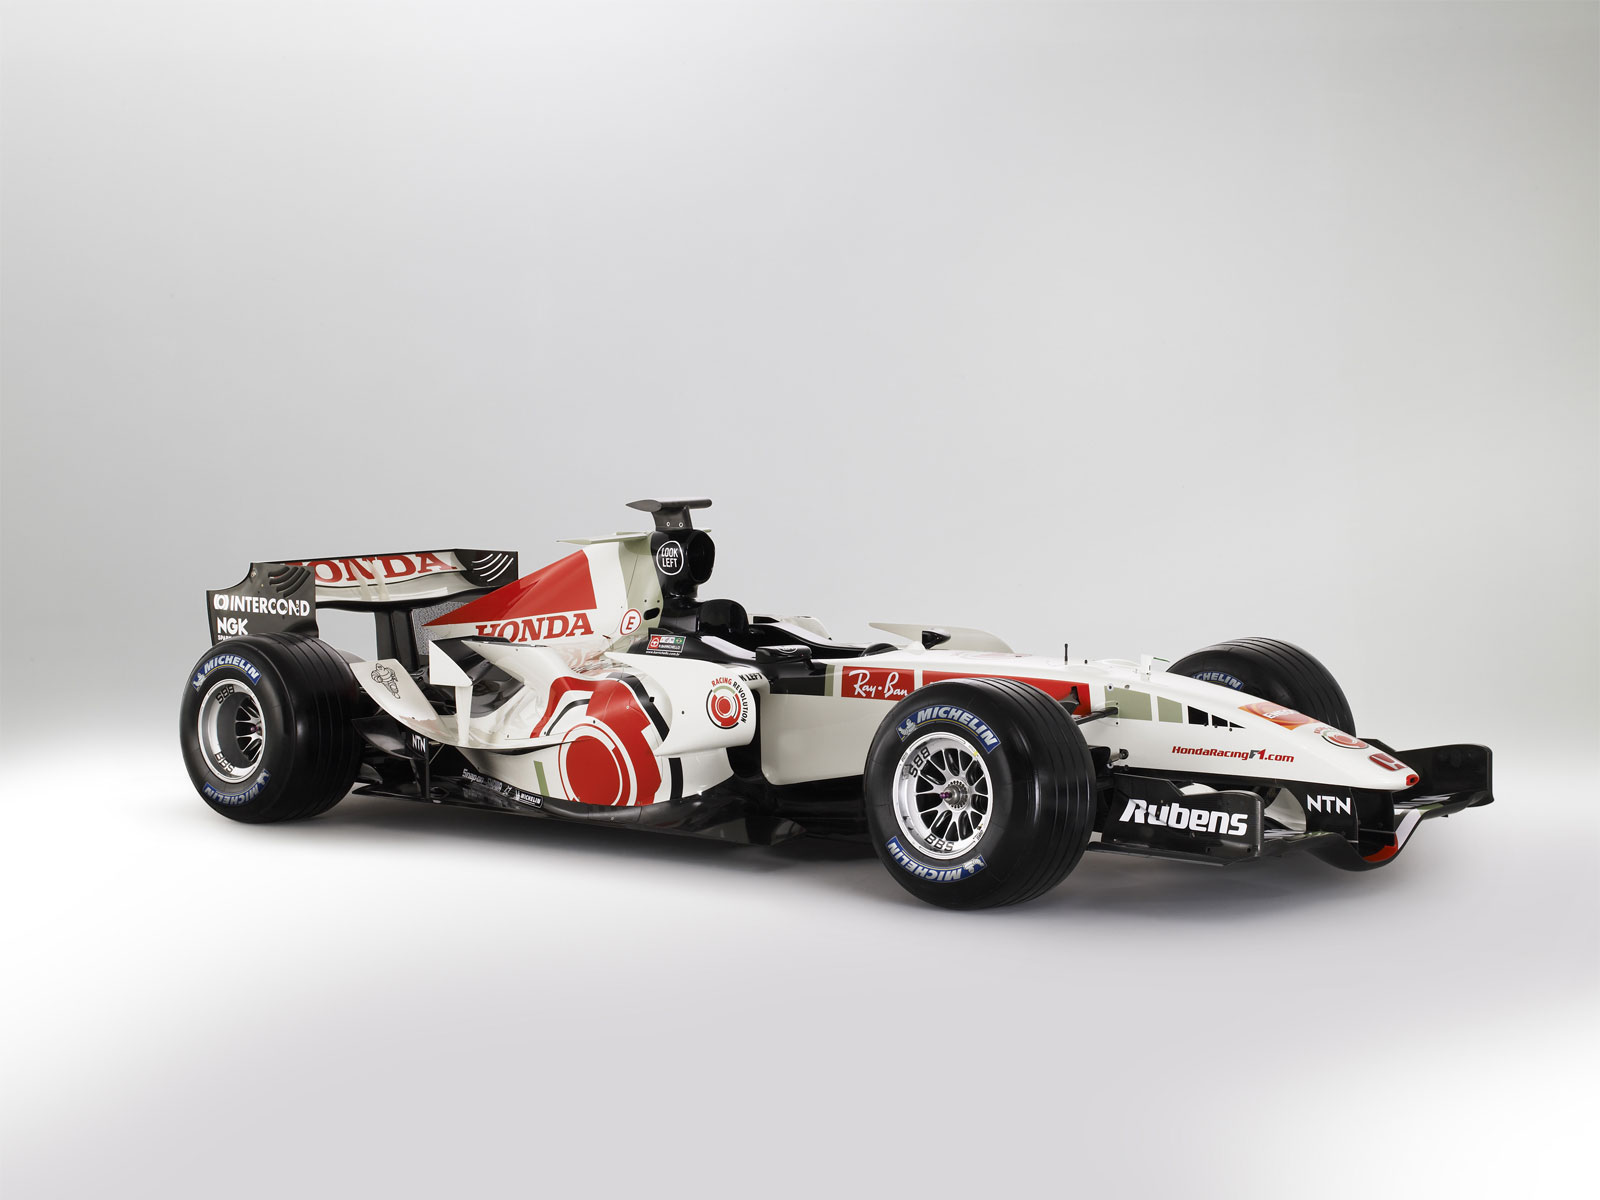 Free Download Honda F1 Racing Car Wallpapers Autoshow Wallpapers 1600x10 For Your Desktop Mobile Tablet Explore 45 Honda F1 Wallpaper Honda F1 Wallpaper Mclaren Honda F1 Wallpaper F1 Wallpapers